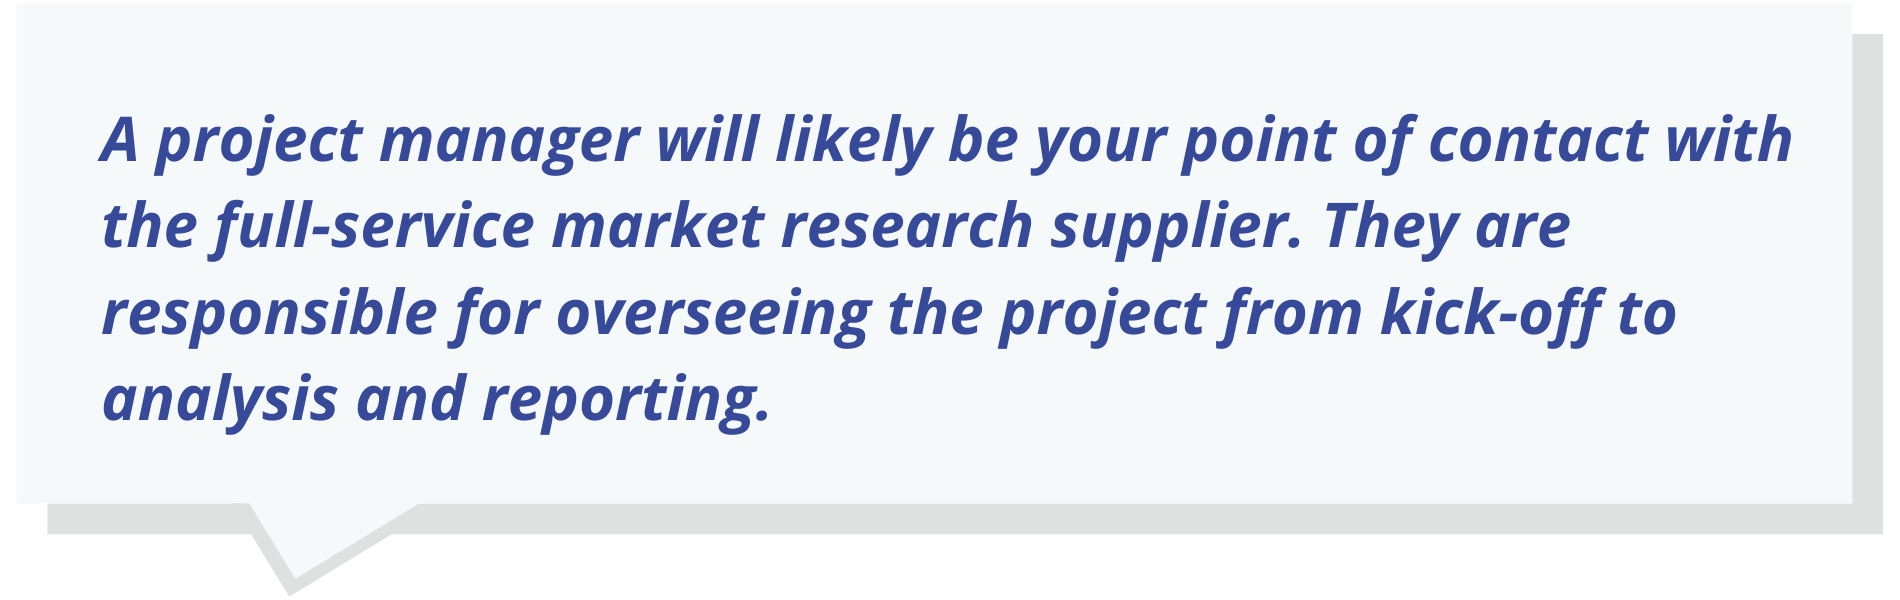 A trustworthy full-service market research supplier is not always obvious from the initial communication stages. Ask the potential research partner for client testimonials or review their ratings online.